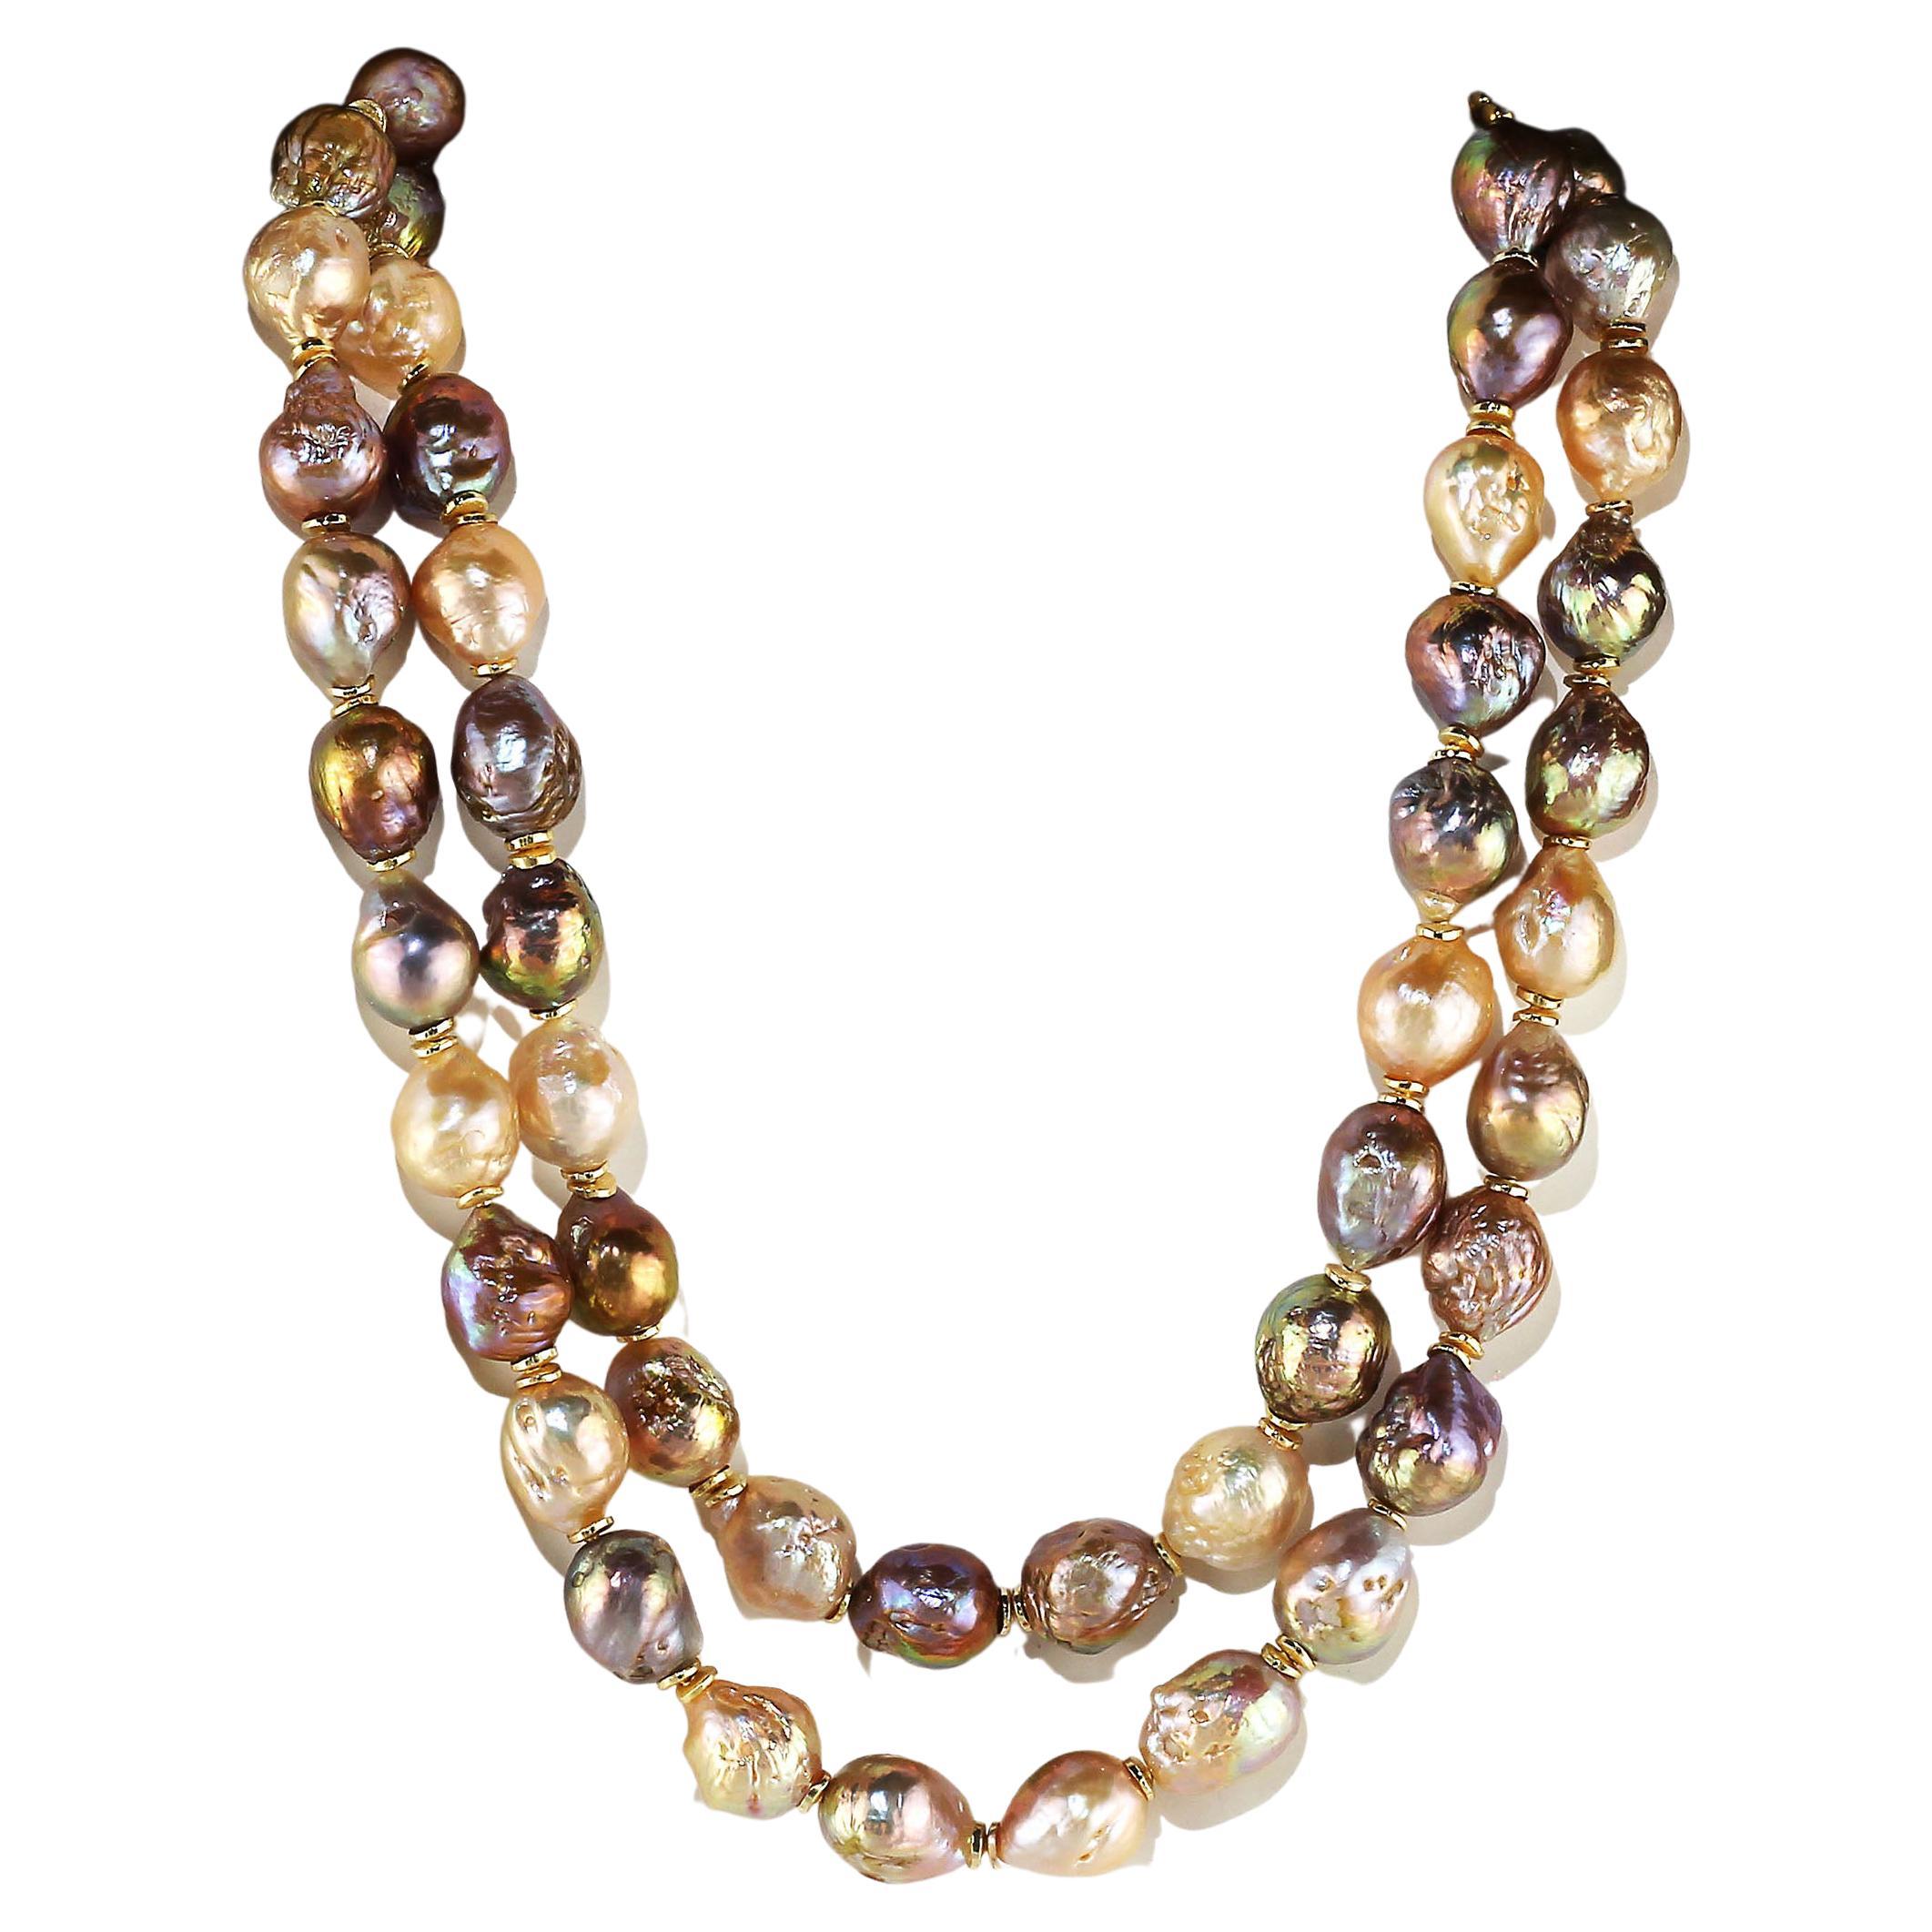 'Pearls are always appropriate' Jackie Kennedy

Elegant baroque Pearl 35 inch necklace in Natural Multi Tones. There are tiny gold tone flutter accents that bring out the goldy color and iridescent shades of these lovely Pearls. This unique necklace